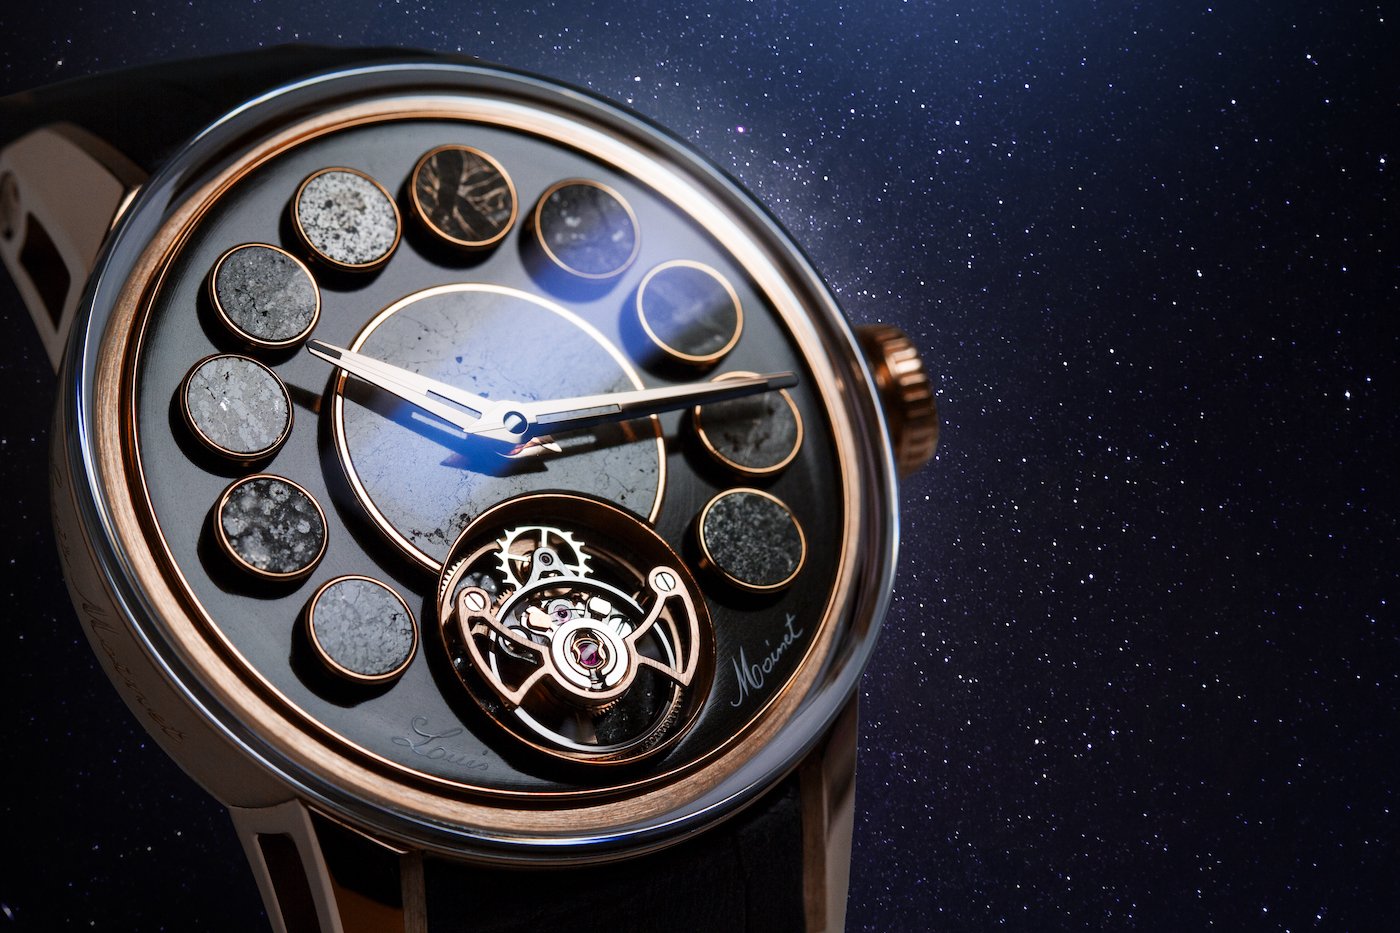 Louis Moinet Cosmopolis: the watch that fell to Earth